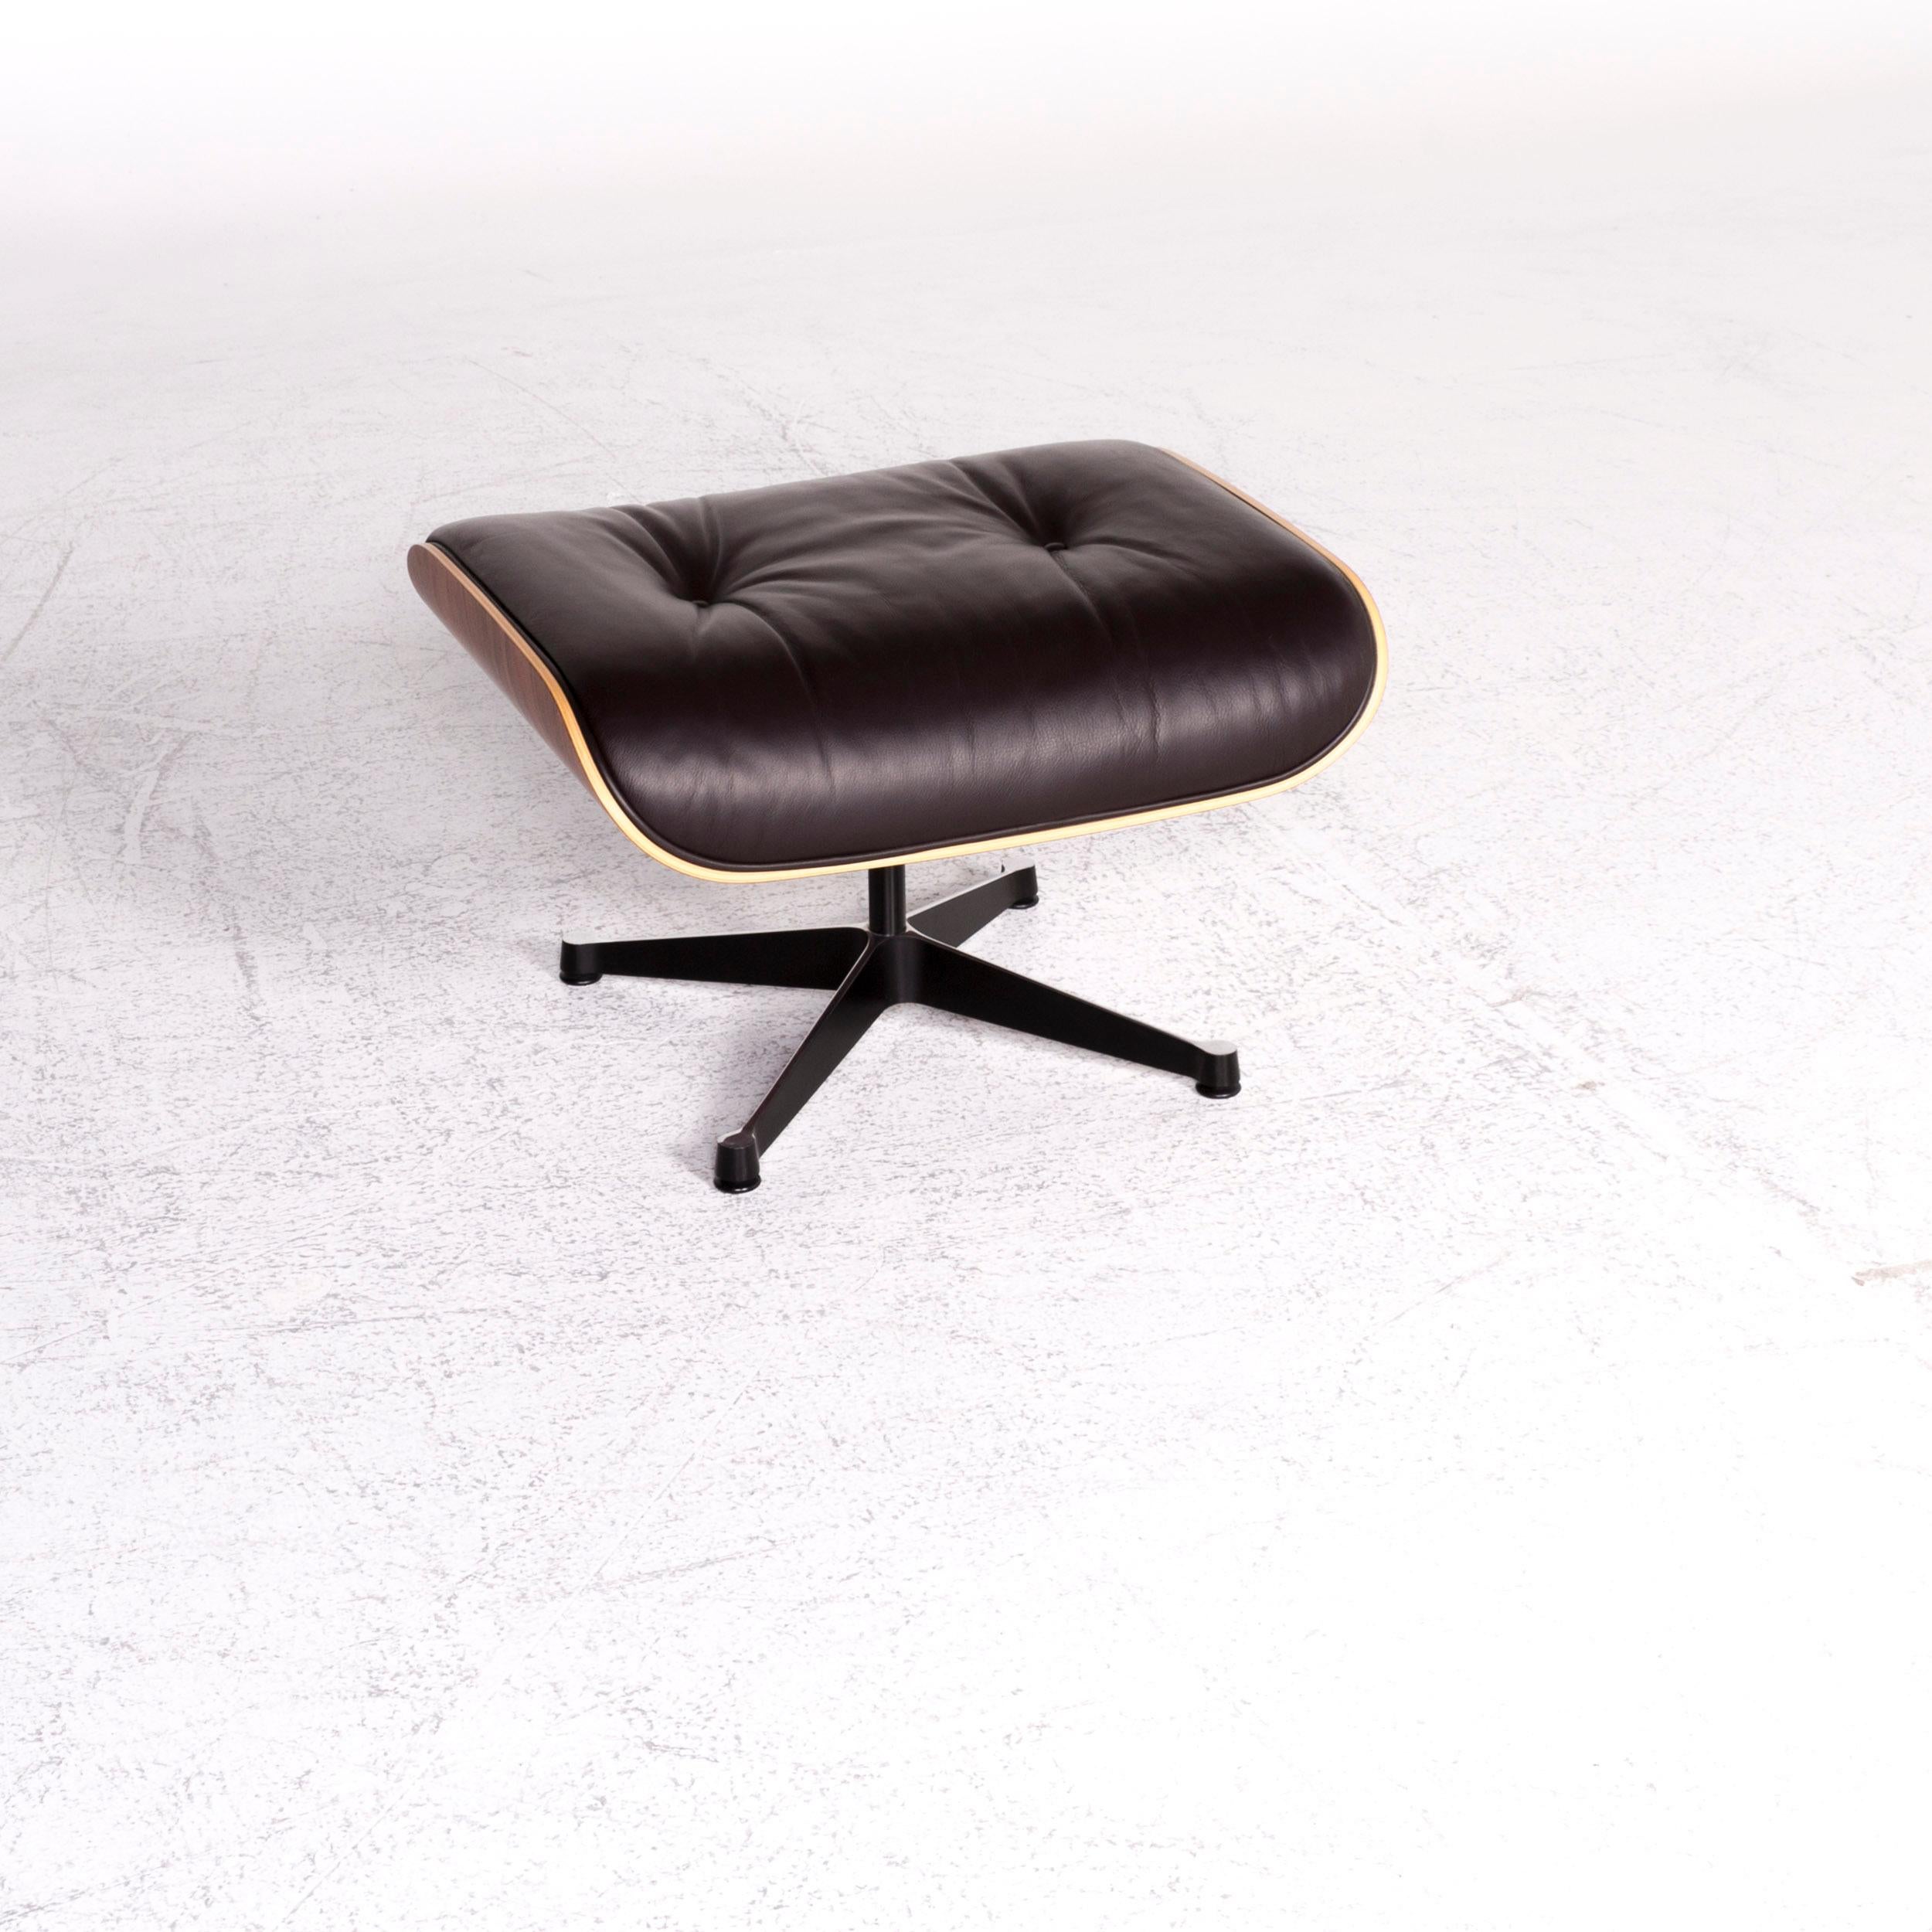 German Vitra Eames Lounge Chair Leather Stool Set Brown Charles & Ray Eames Chair For Sale